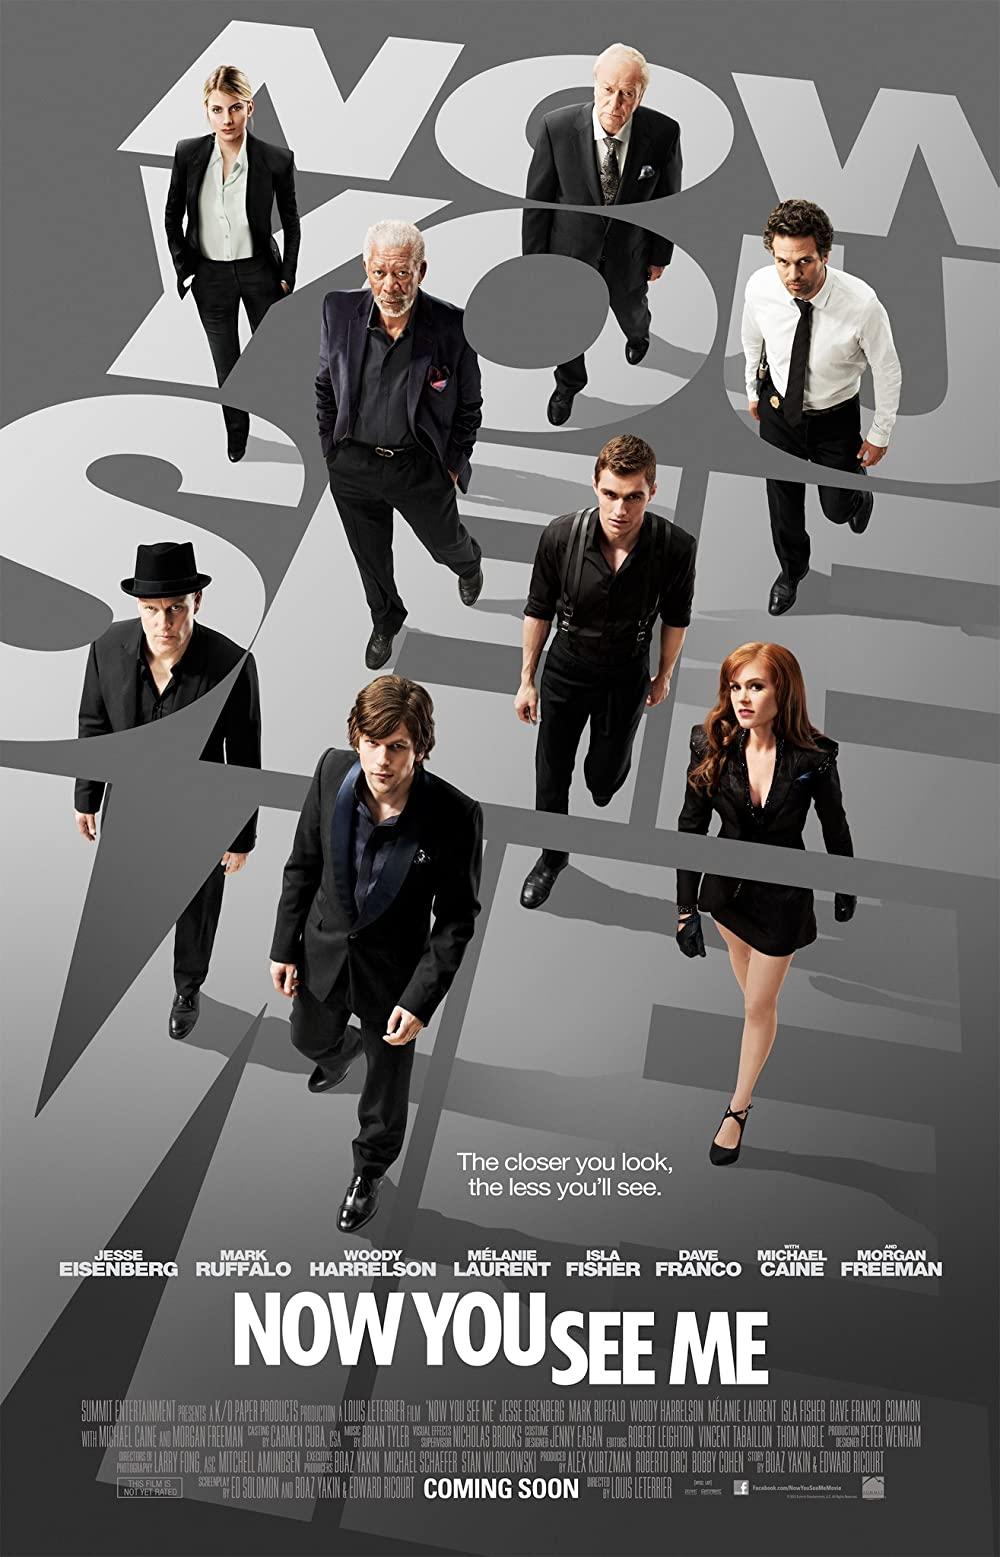 4. NOW YOU SEE ME